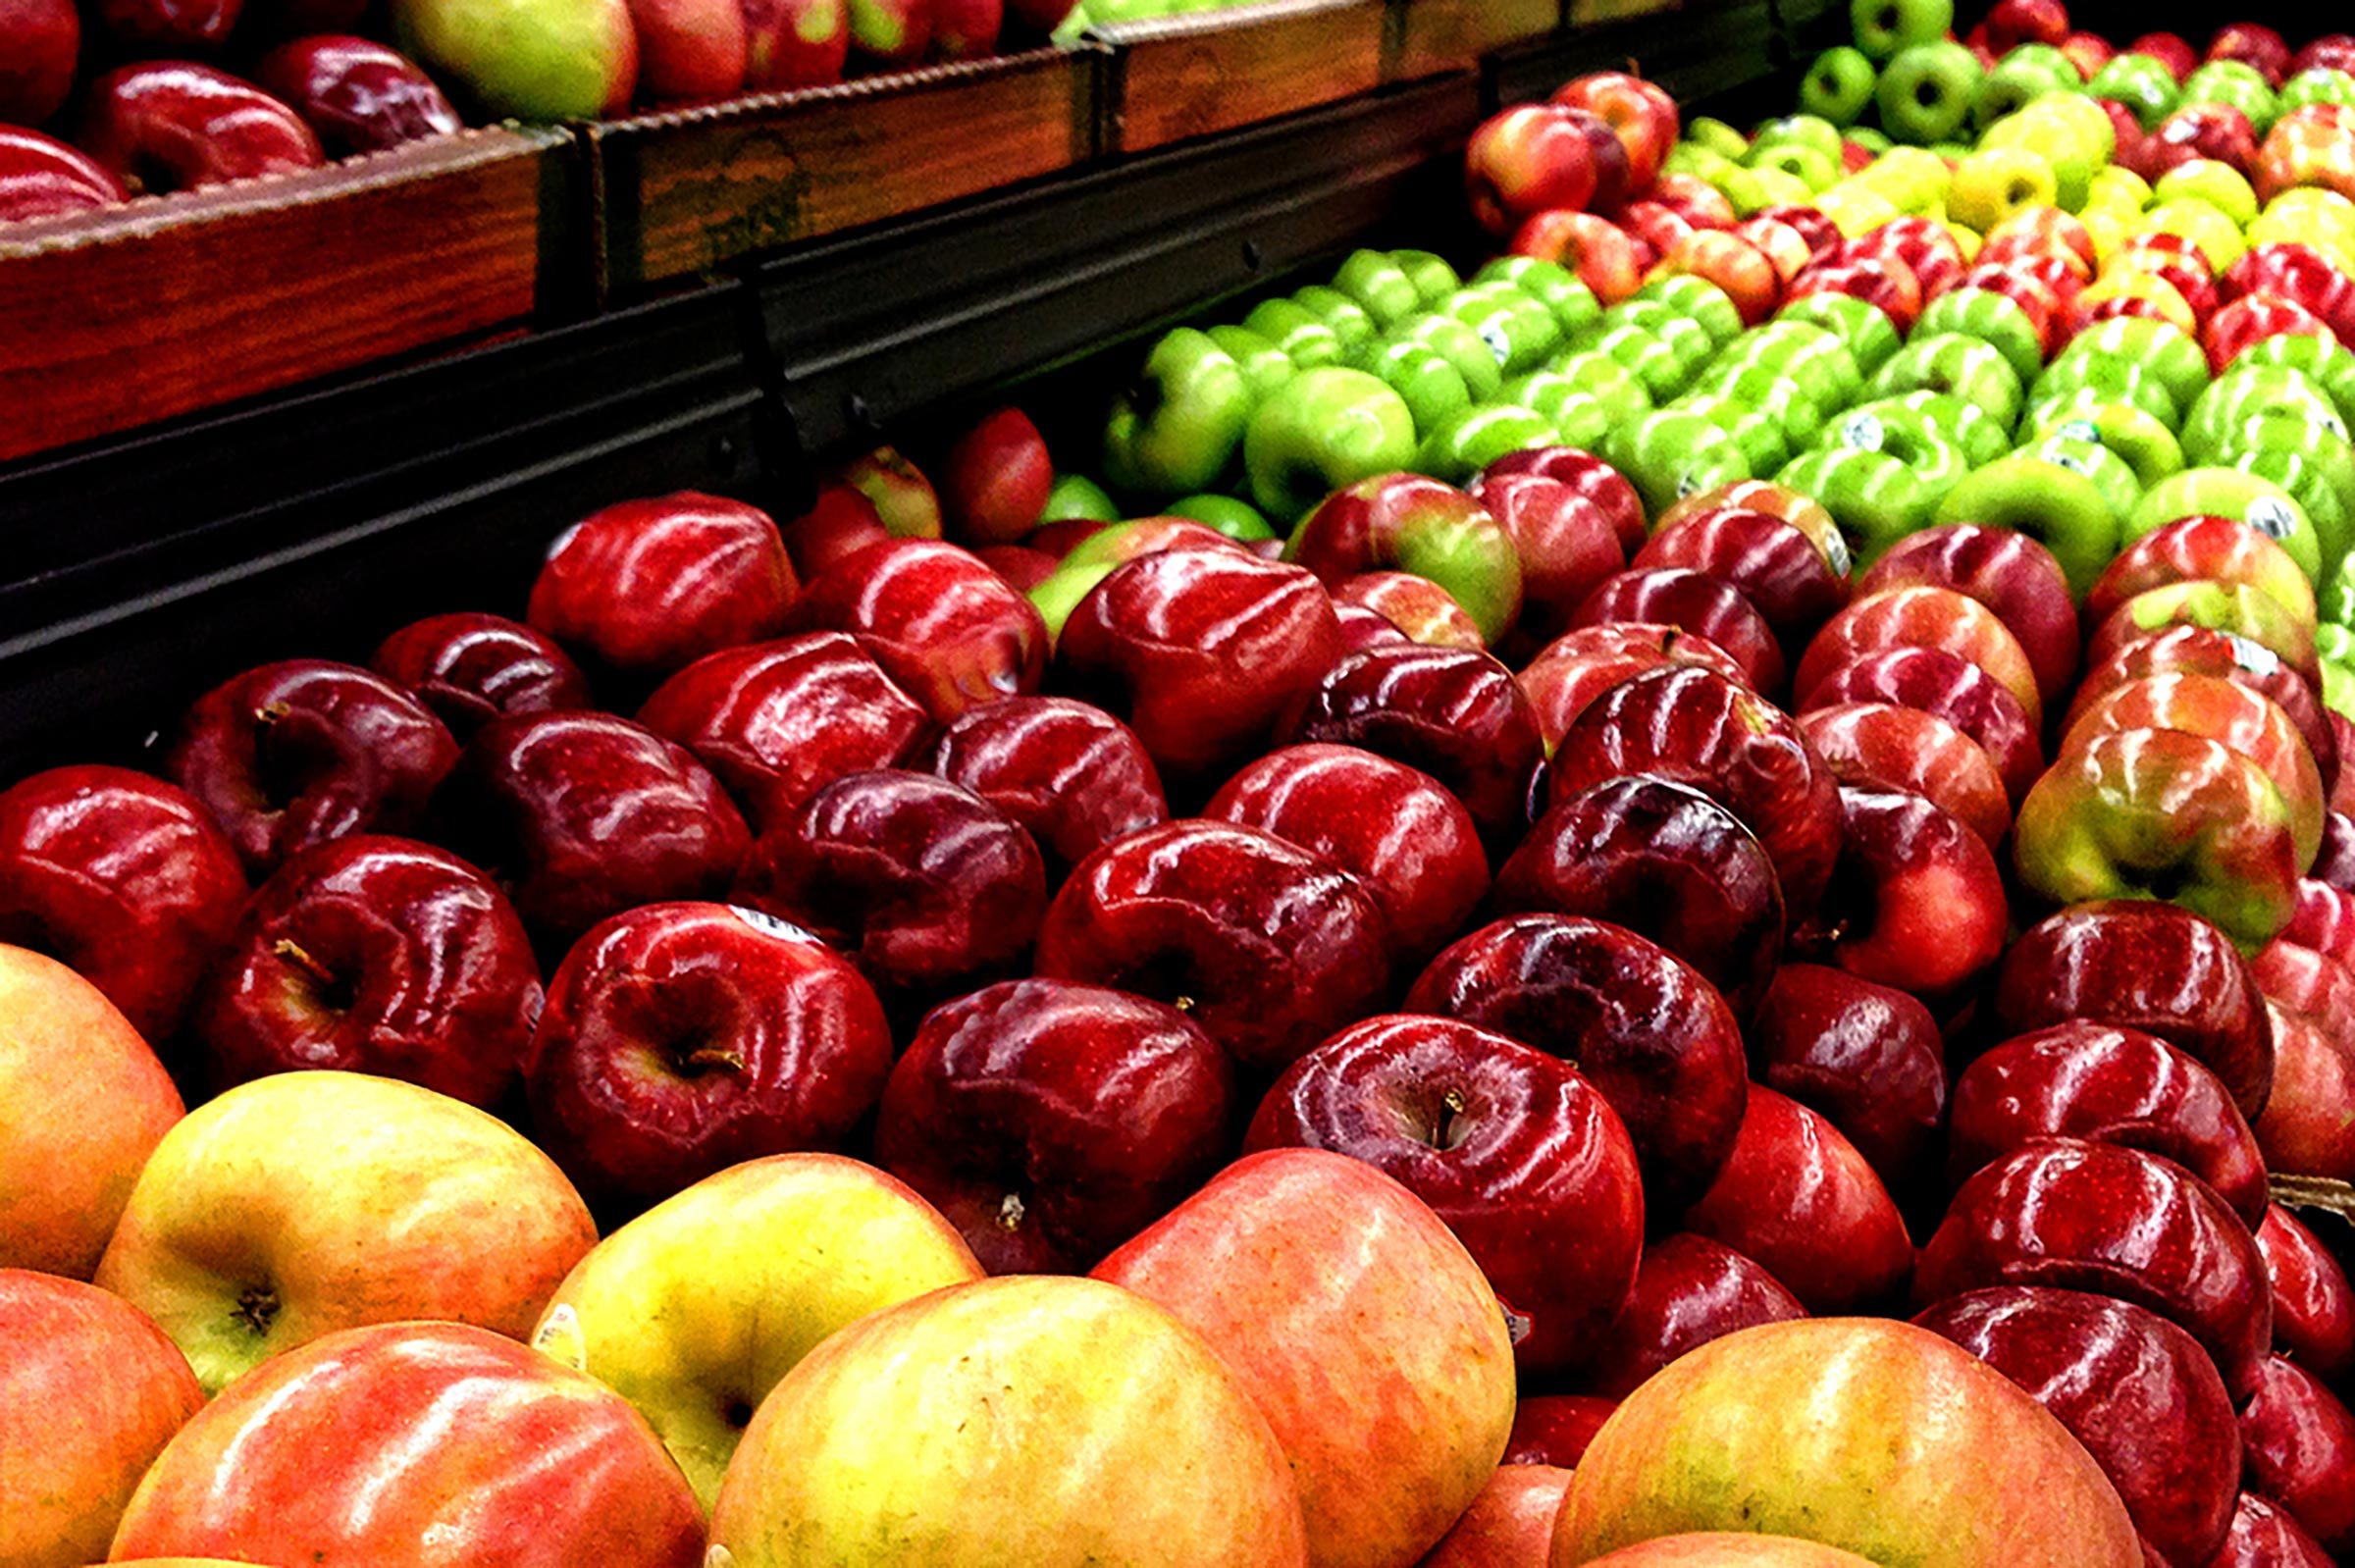 https://www.rd.com/wp-content/uploads/2017/09/01_apples_The-Gross-Truth-About-the-Apples-Youre-Buying-at-the-Supermarket_224332468_Robin-Keefe.jpg